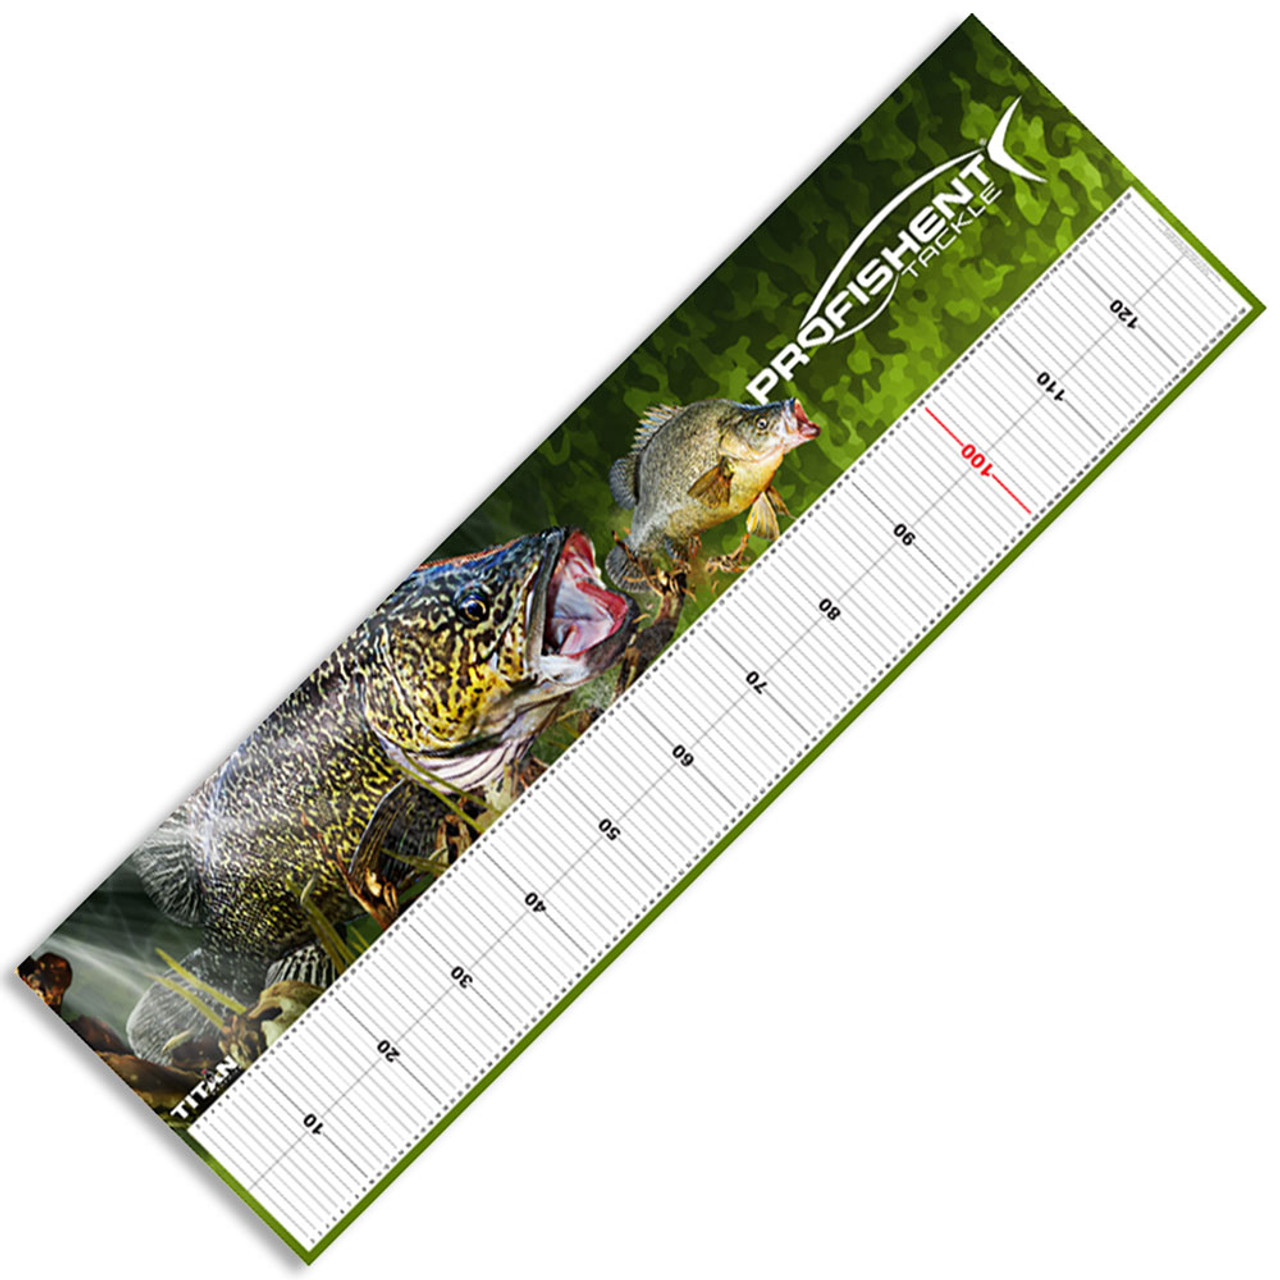 Best Discount Sale Profishent Tackle Fish Measure Mat in 2022 